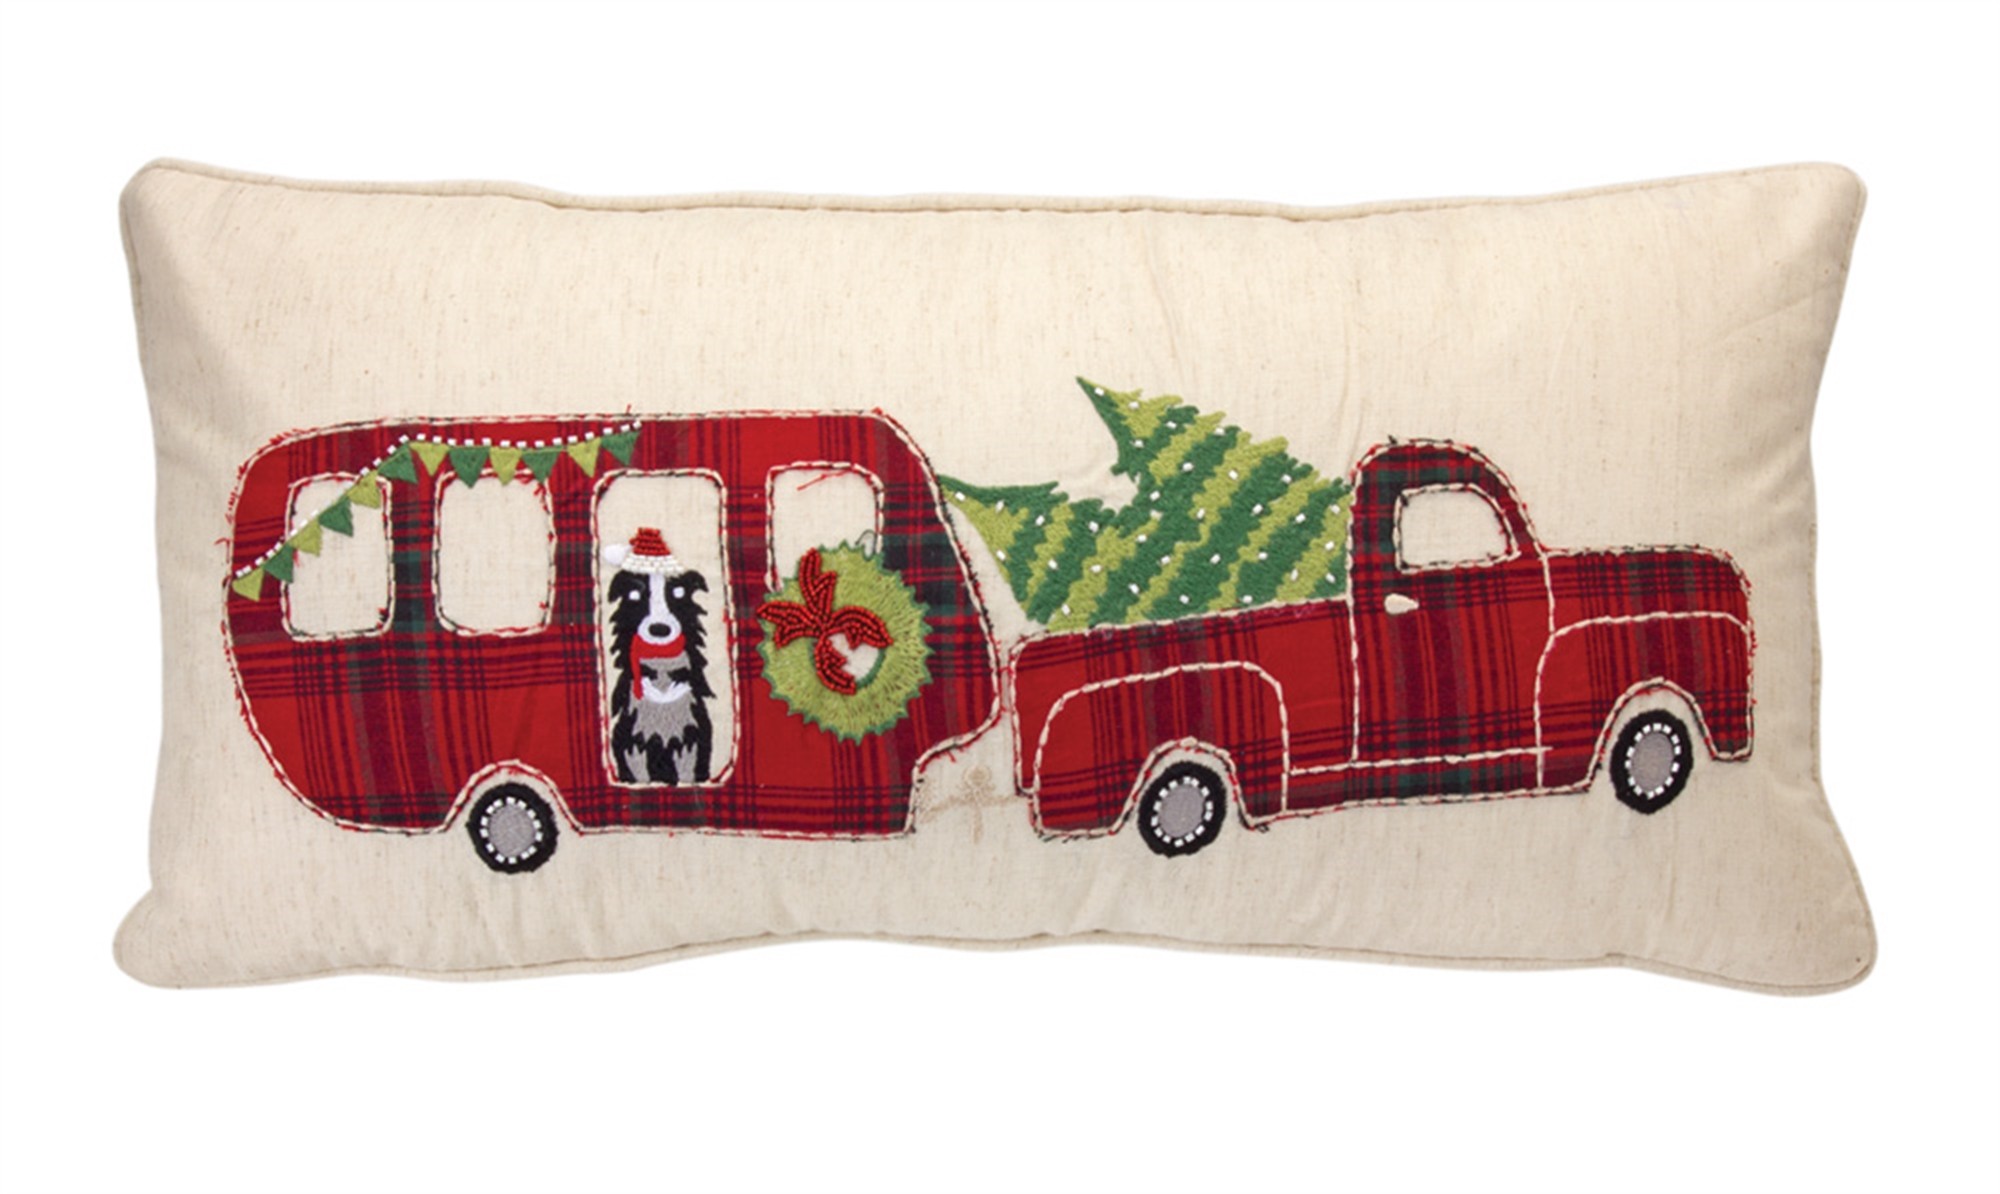 Truck and Camper Pillow 22"L x 9"H Cotton